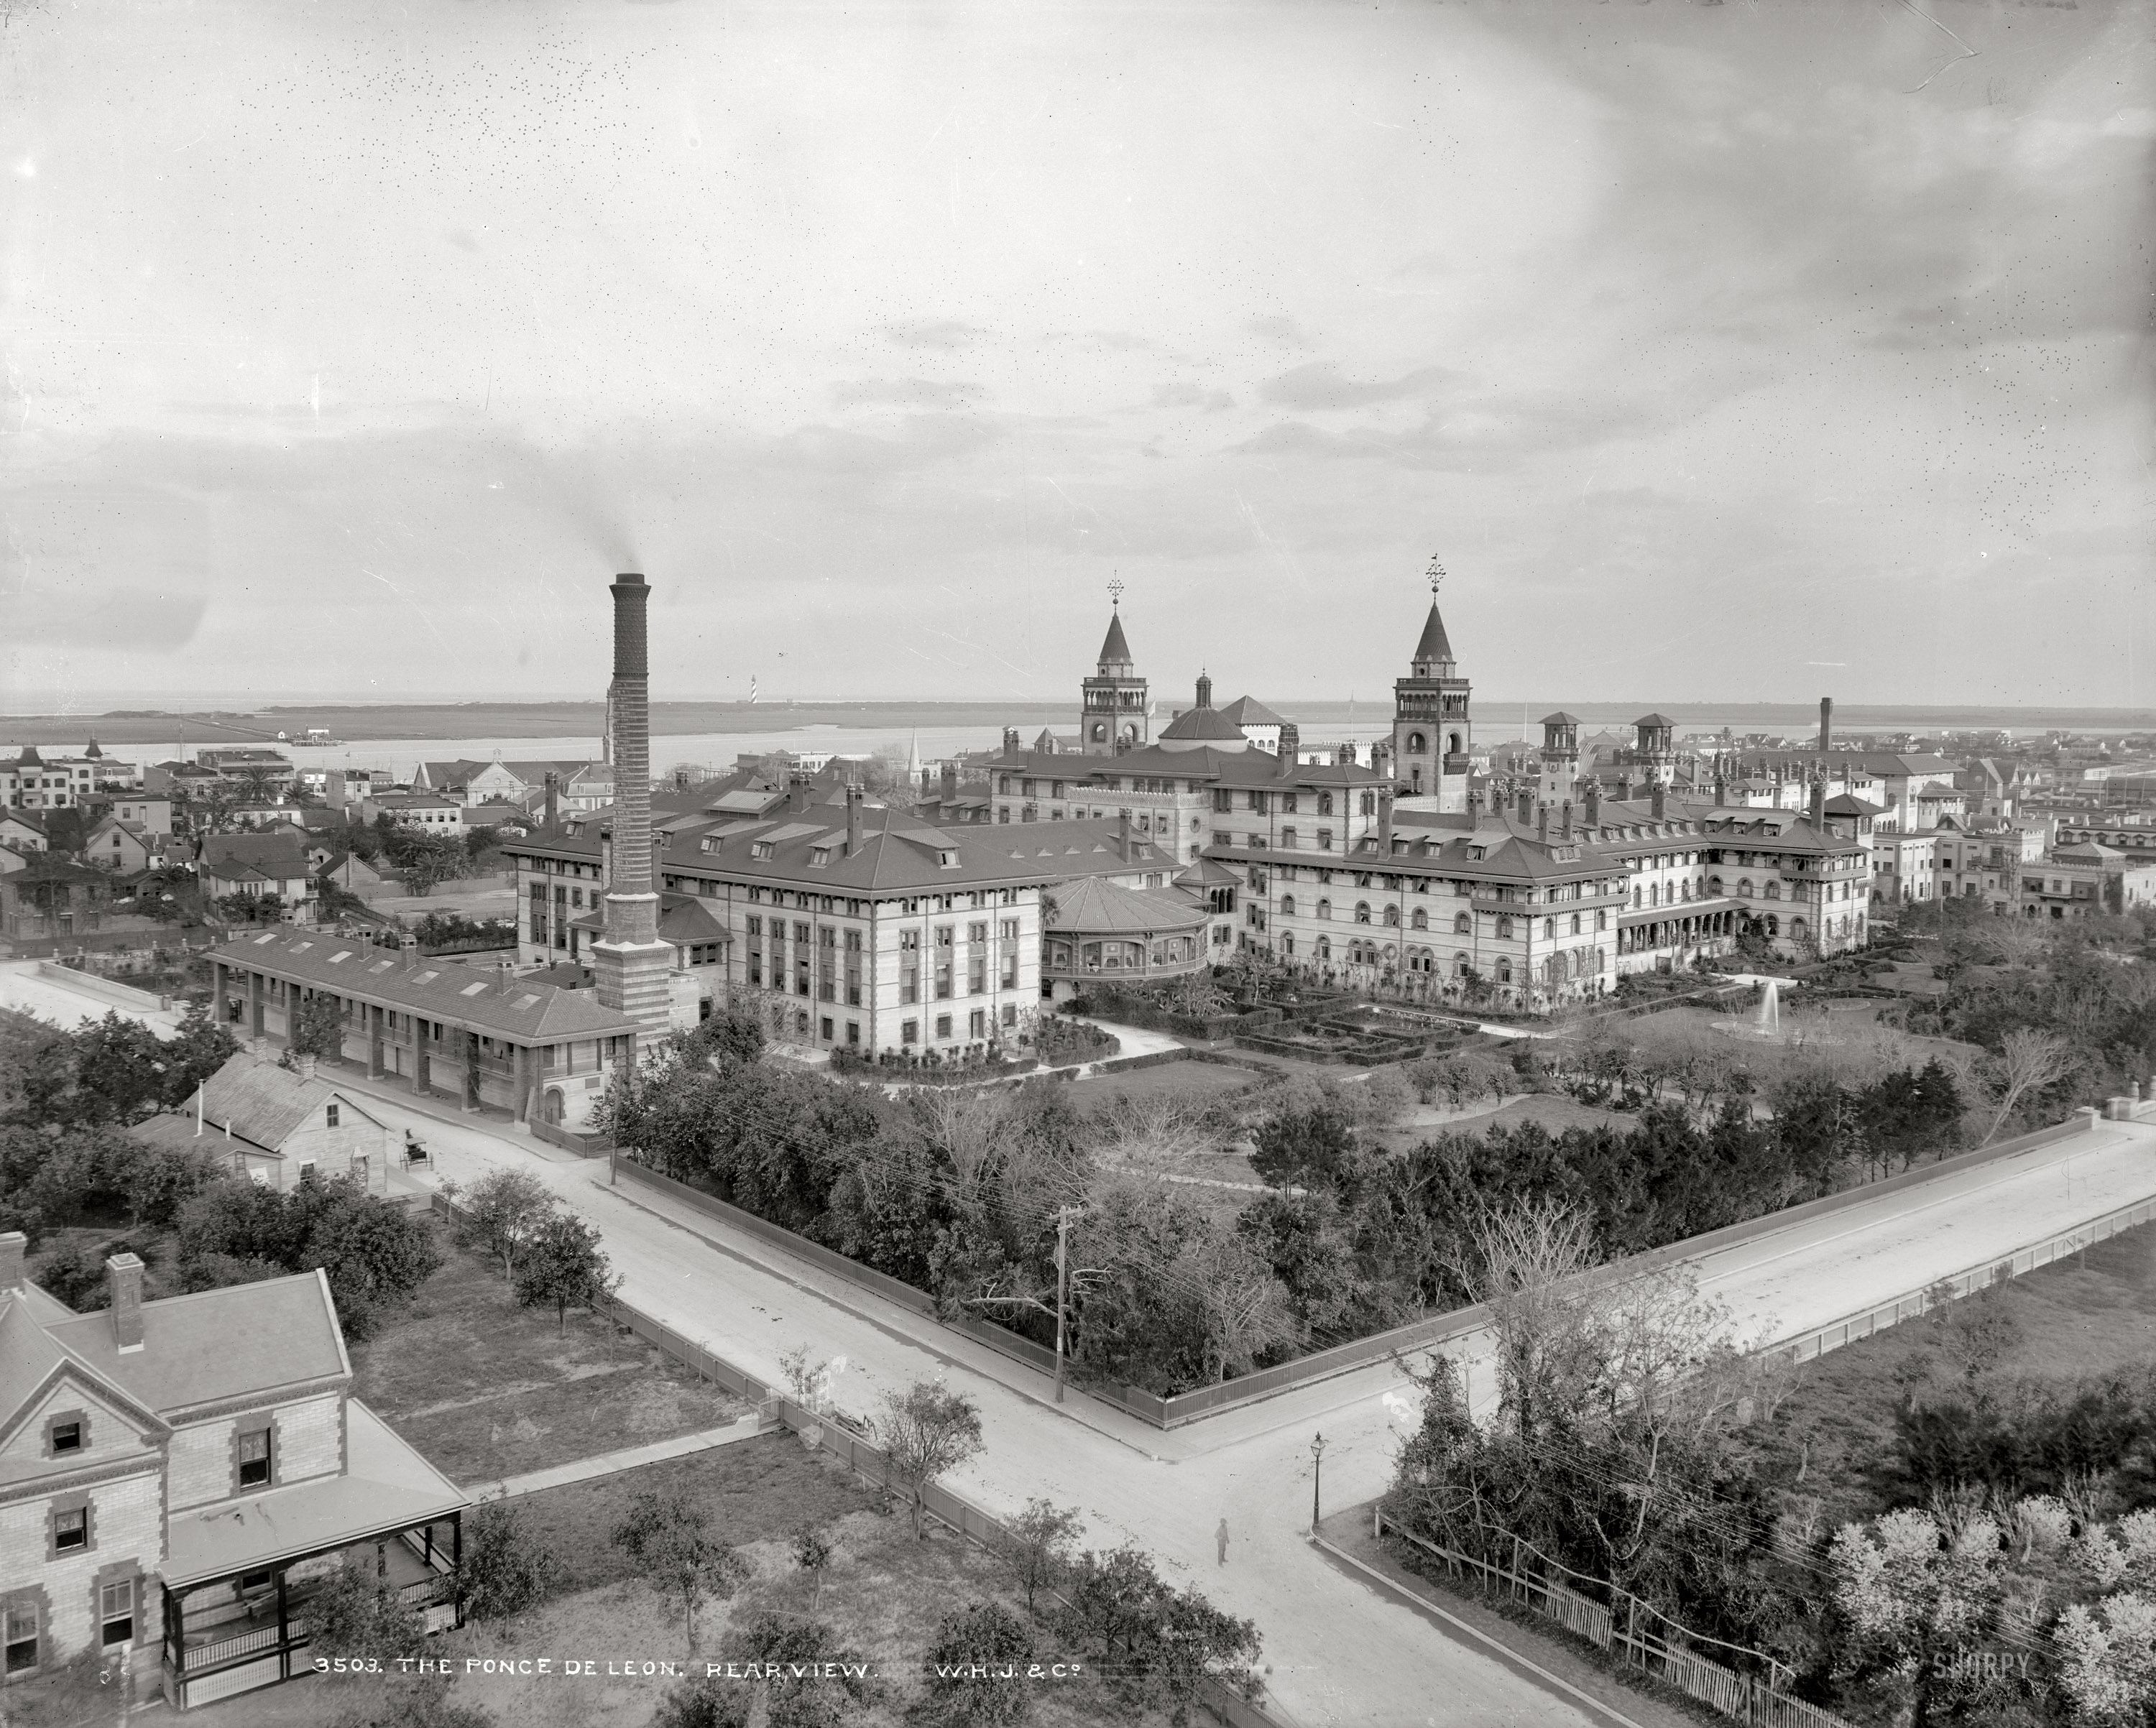 St. Augustine, Florida, circa 1890s. "The Ponce de Leon Hotel, rear view." With this post, Shorpy is entering vacation mode for a week, having packed his bindle and hopped a freight for the wide open spaces. While he's gone we'll try to make do with just a post or two every day. View full size.